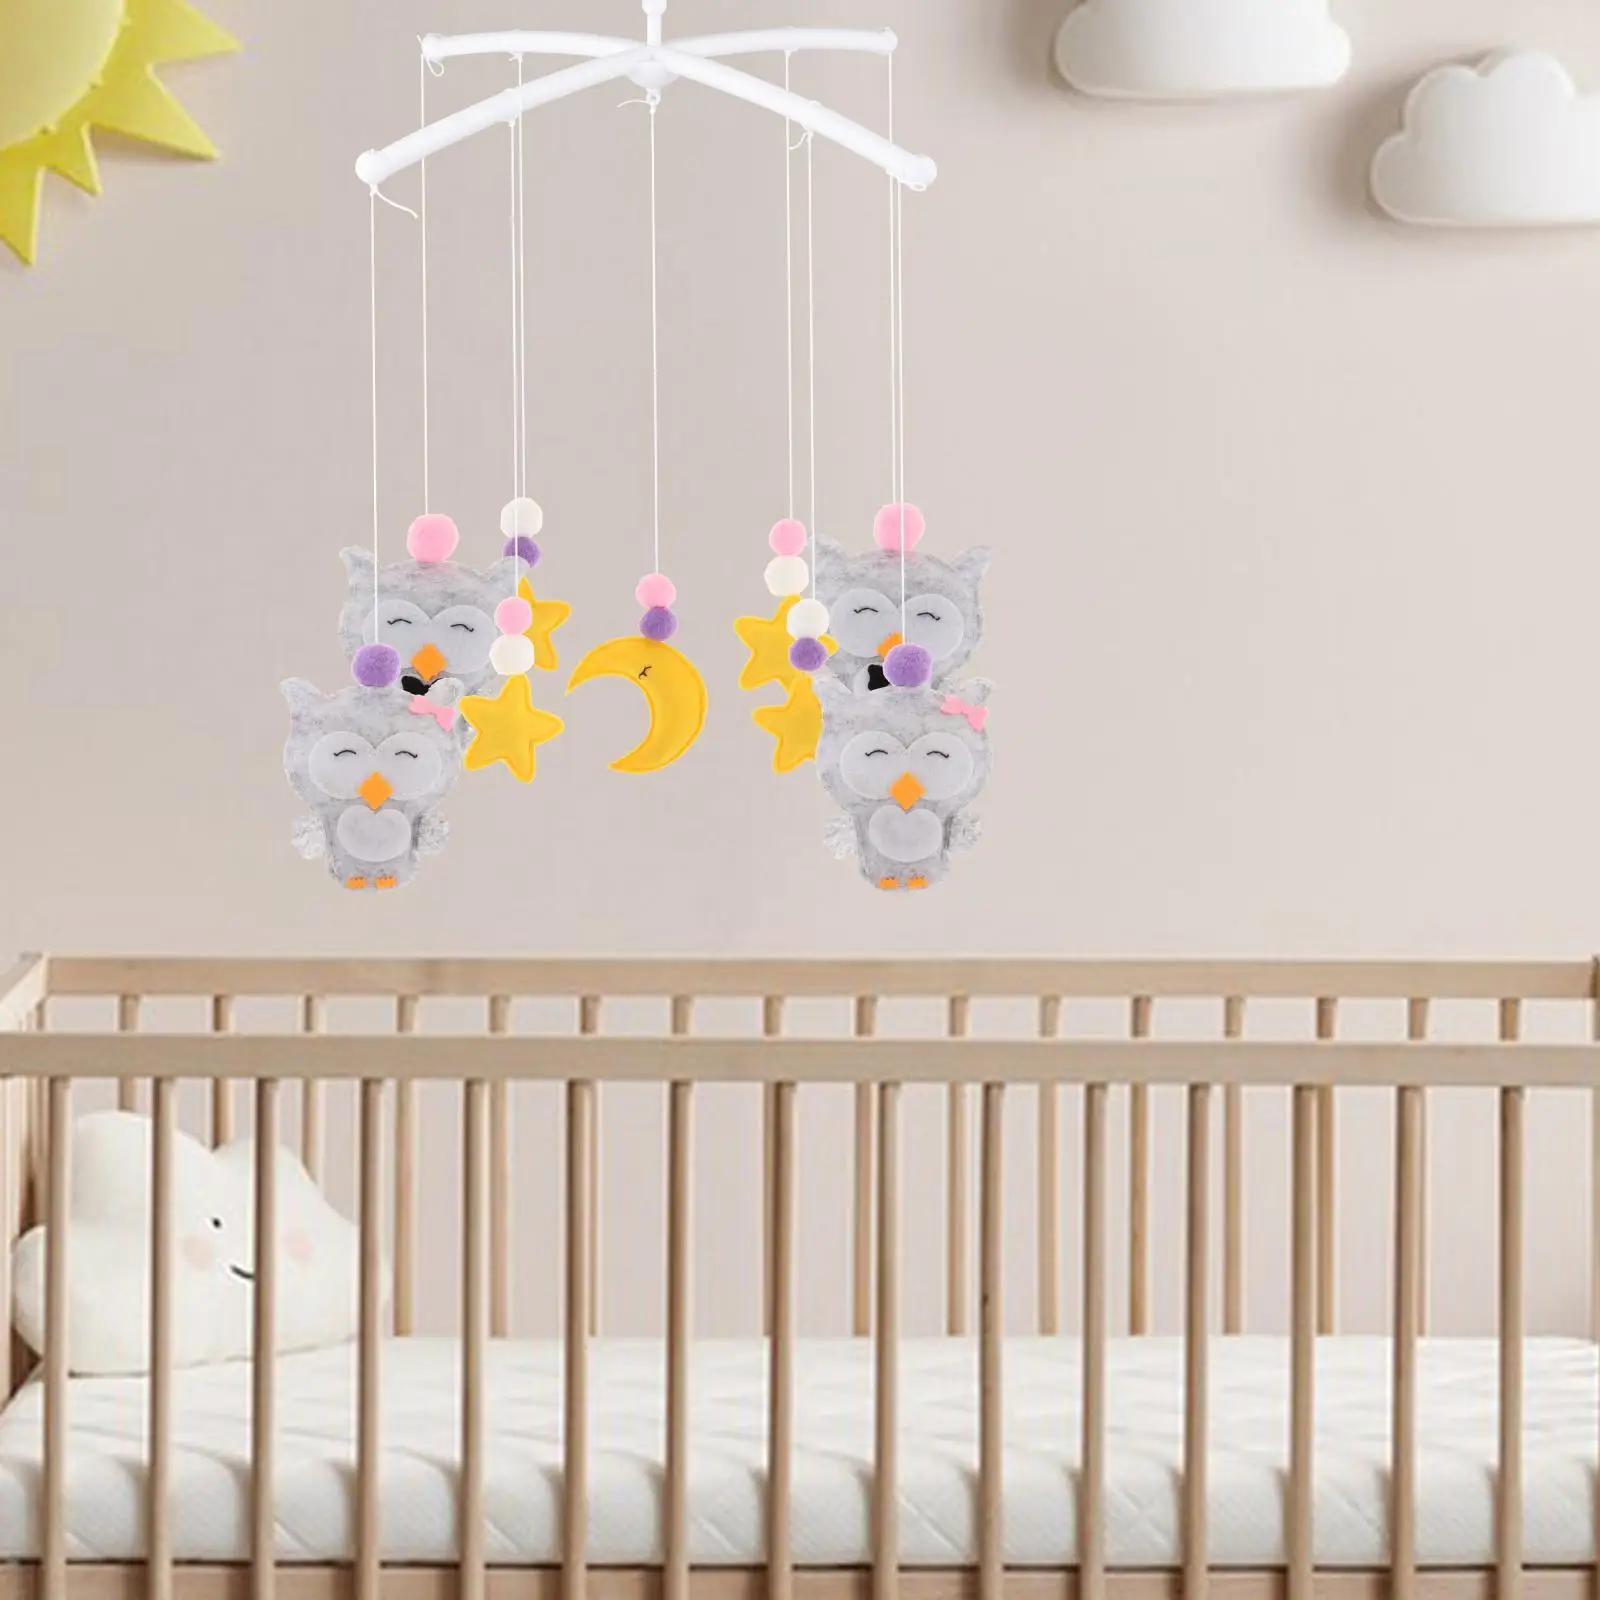 Crib Hanging Toys Felt Crib Mobile Hanging Interactive Unisex Cute Baby Rattle Toy Bed for Nursery Pushchair Pram Decoration